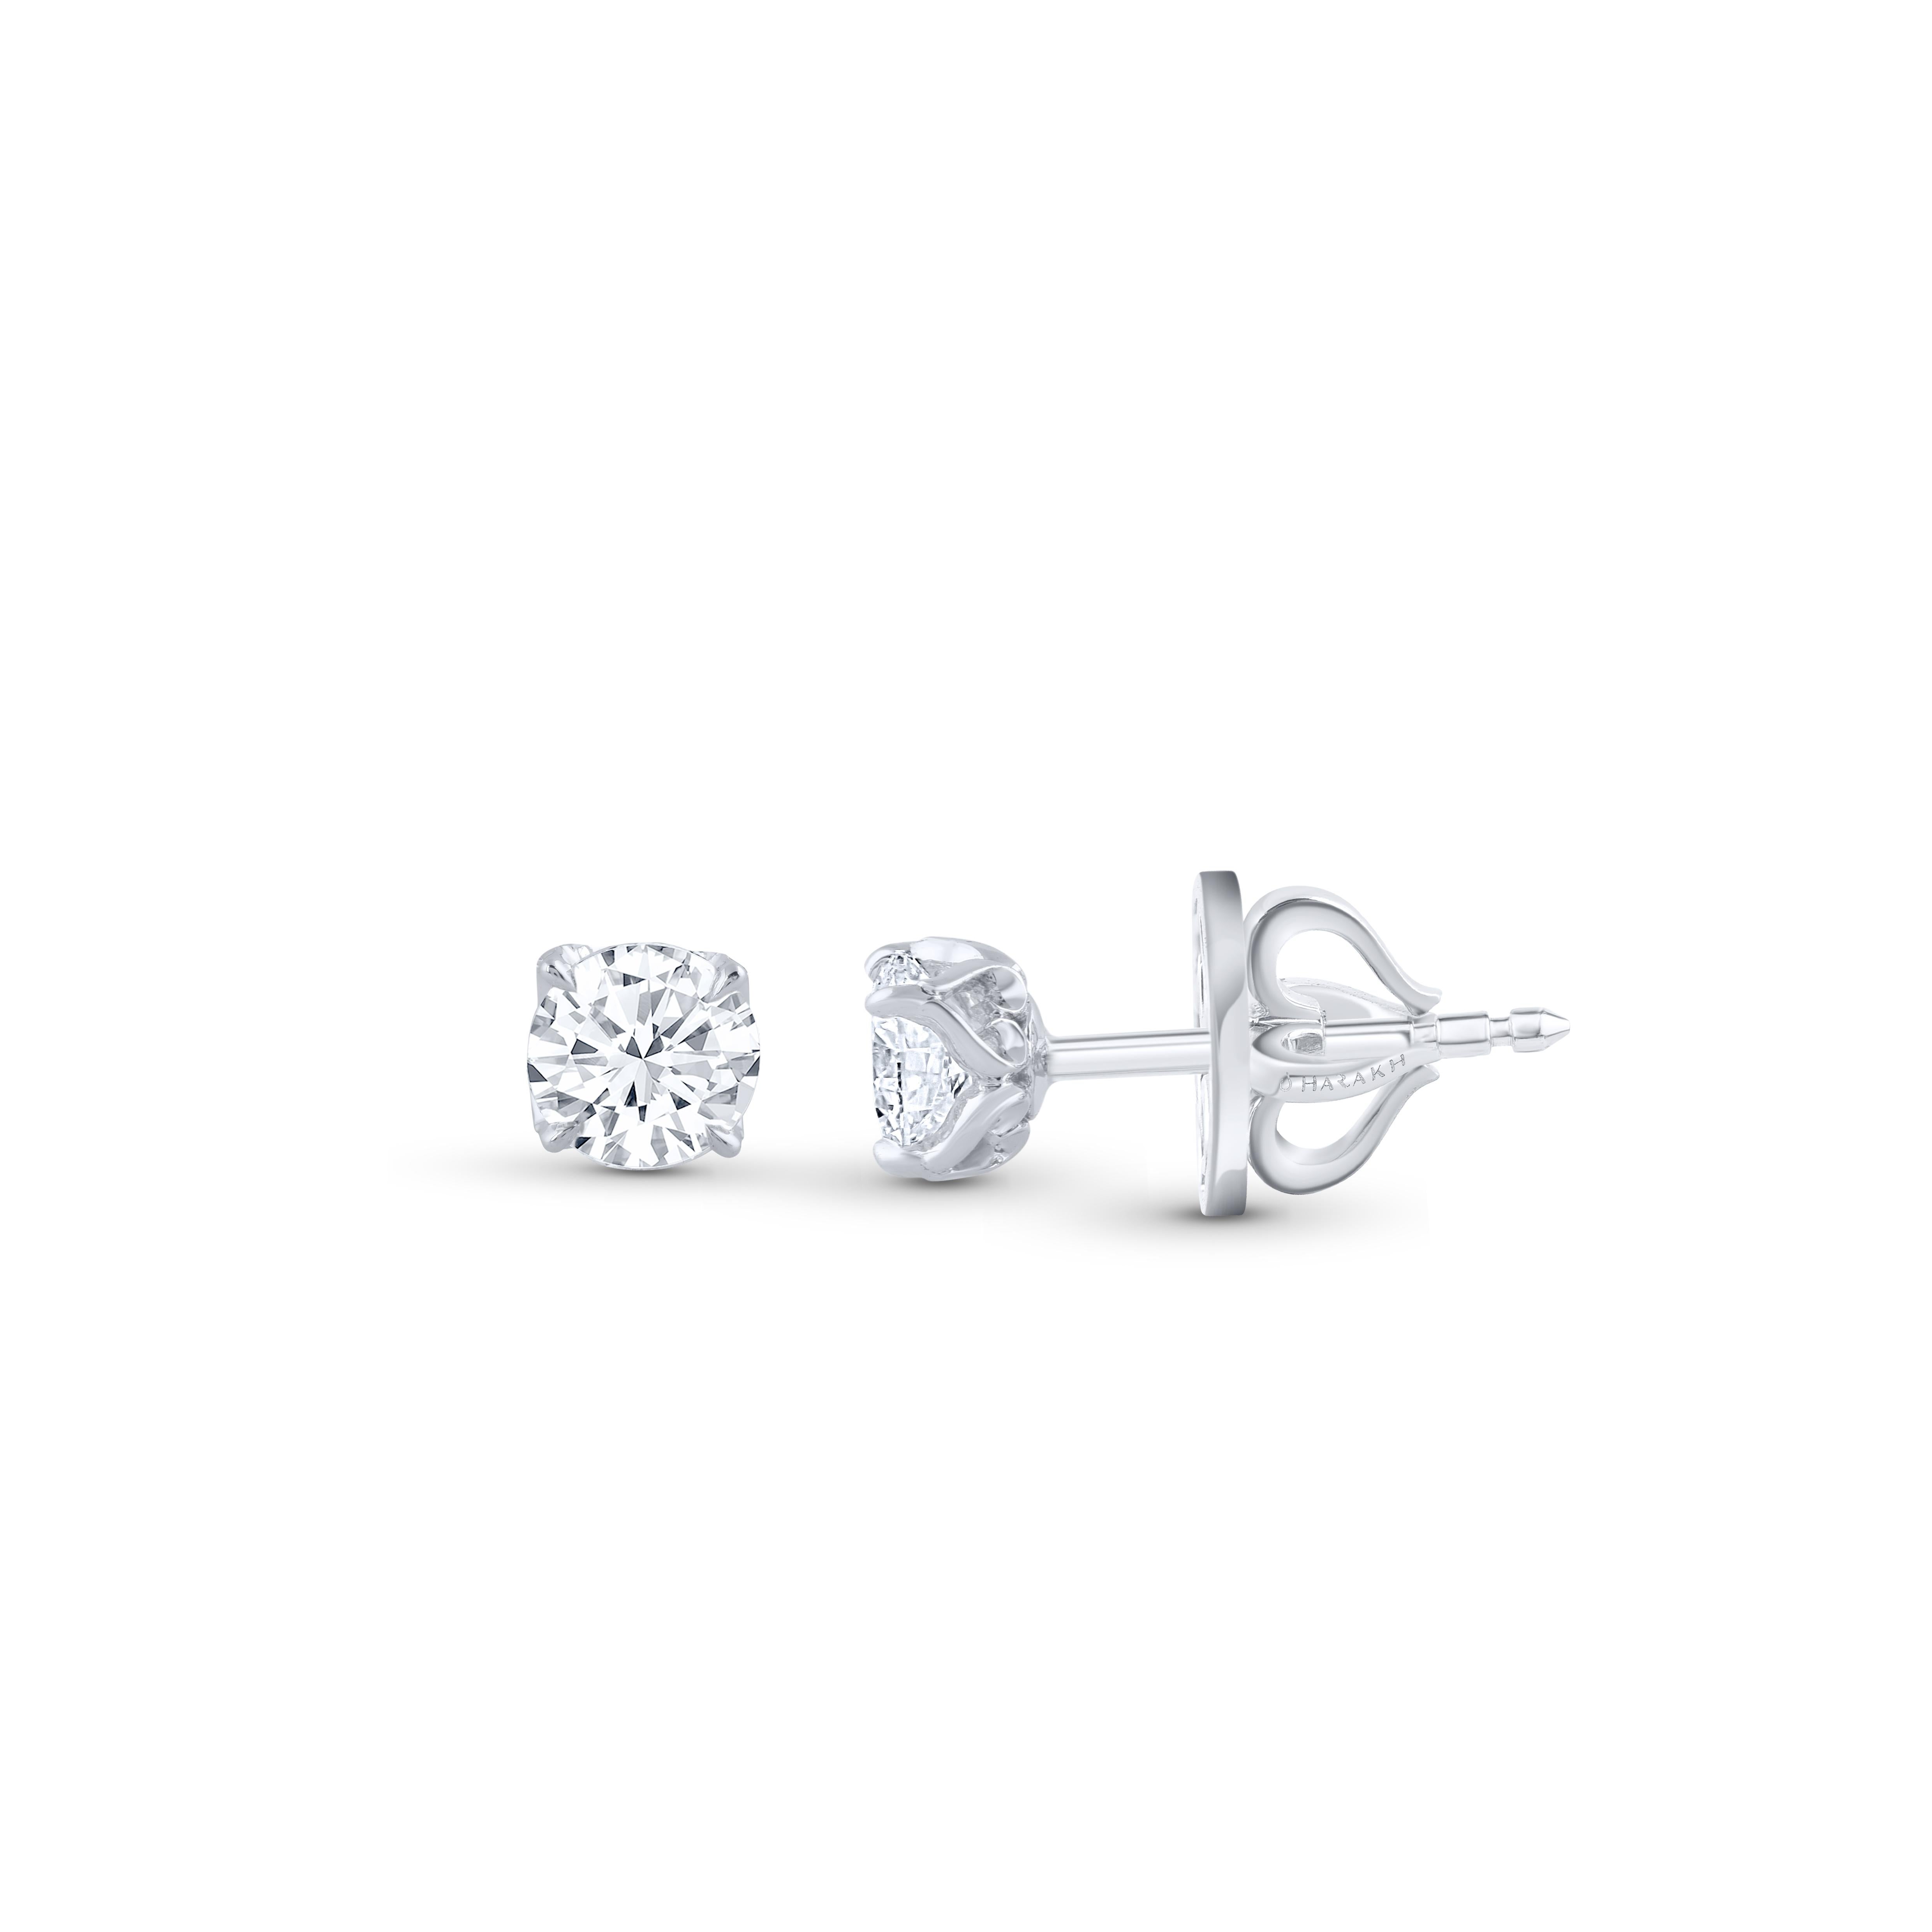 These classic diamond studs showcase a pair of perfectly matched diamonds weighing total 0.60 carats. Crafted in 18 karat white gold, these four prong earrings are available in yellow and rose gold as well.

Perfect for yourself and for gifting as